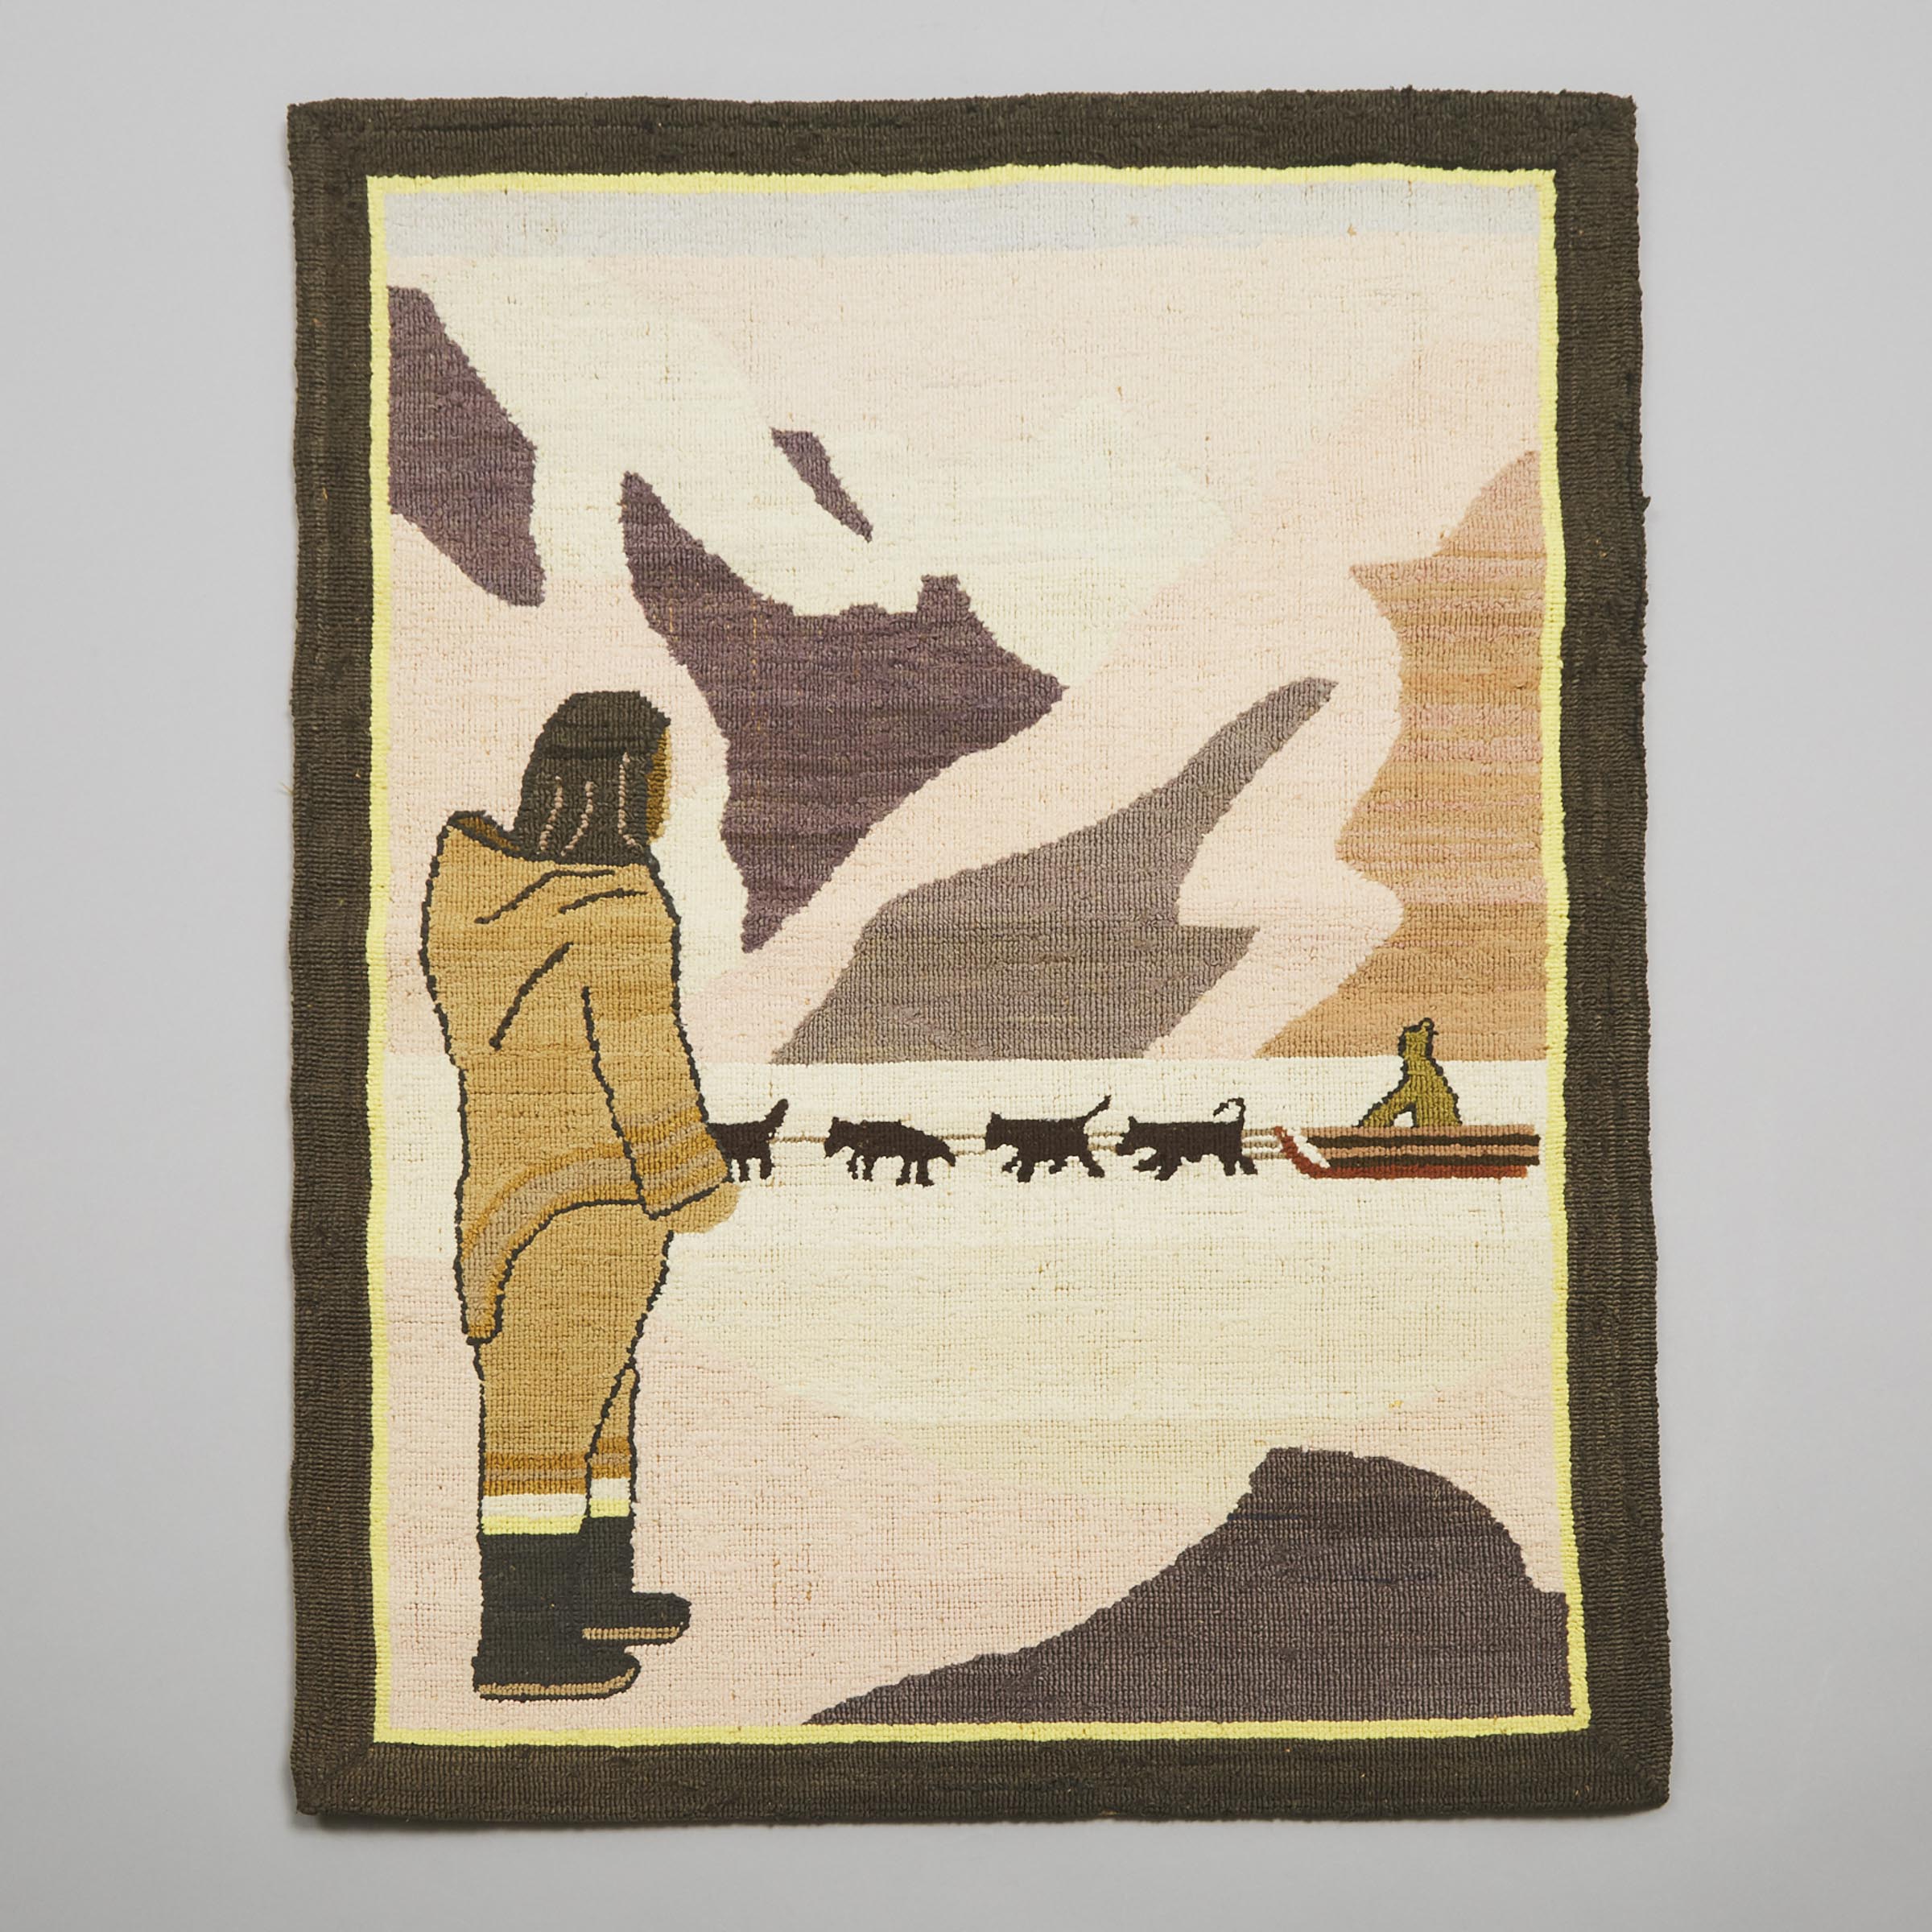 Grenfell Labrador Industries 'Man and Distant Dog Sled' Hooked Mat, mid 20th century